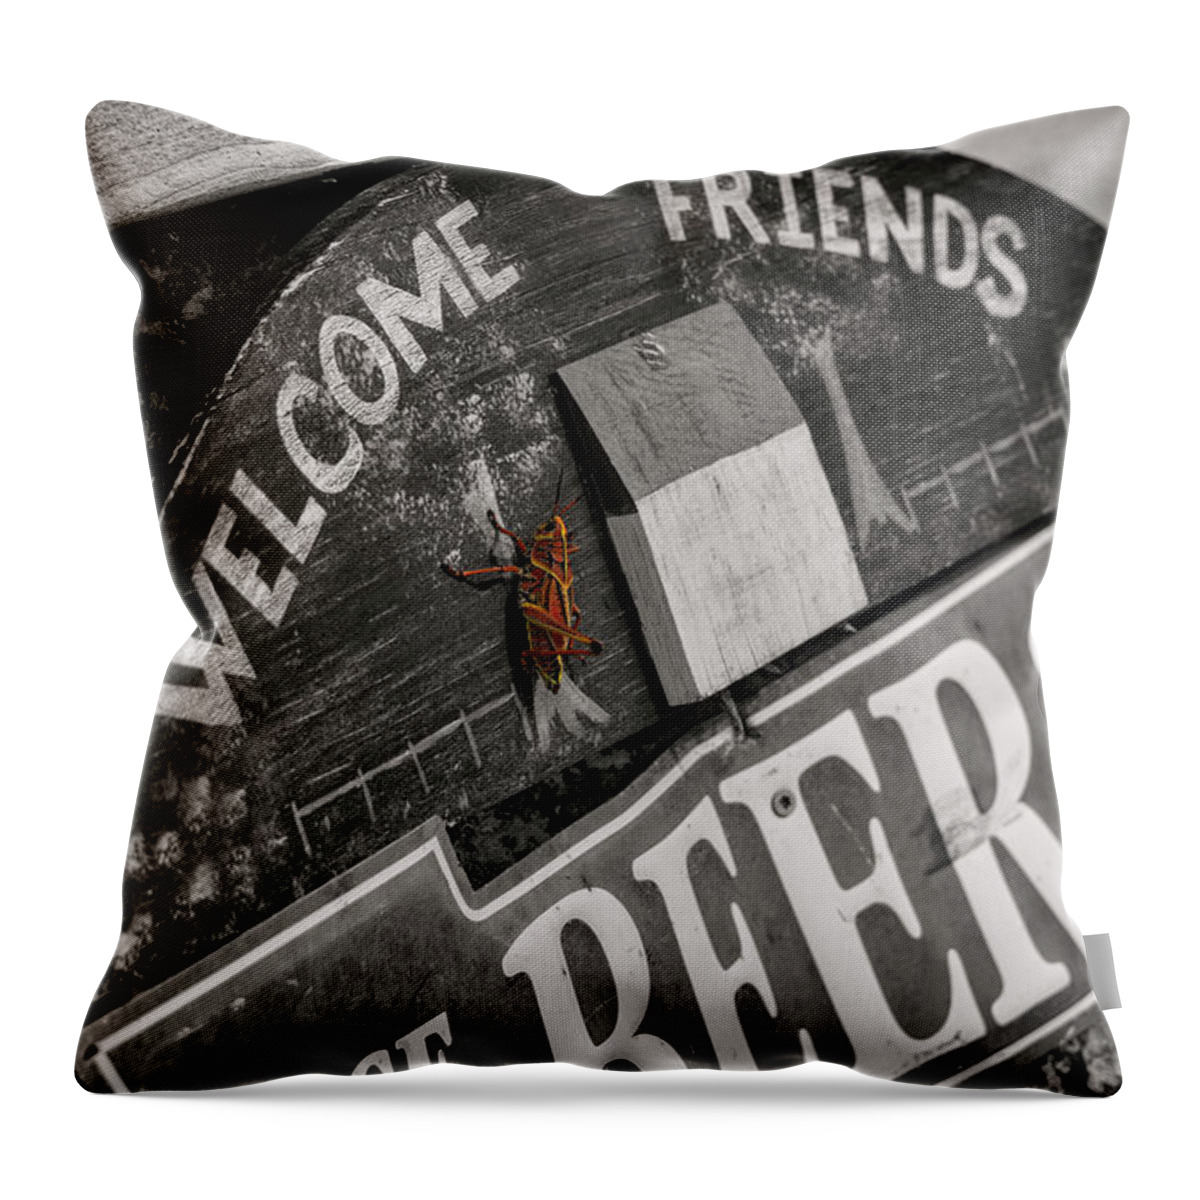 Sign Throw Pillow featuring the photograph Everyone Welcome by Carolyn Hutchins